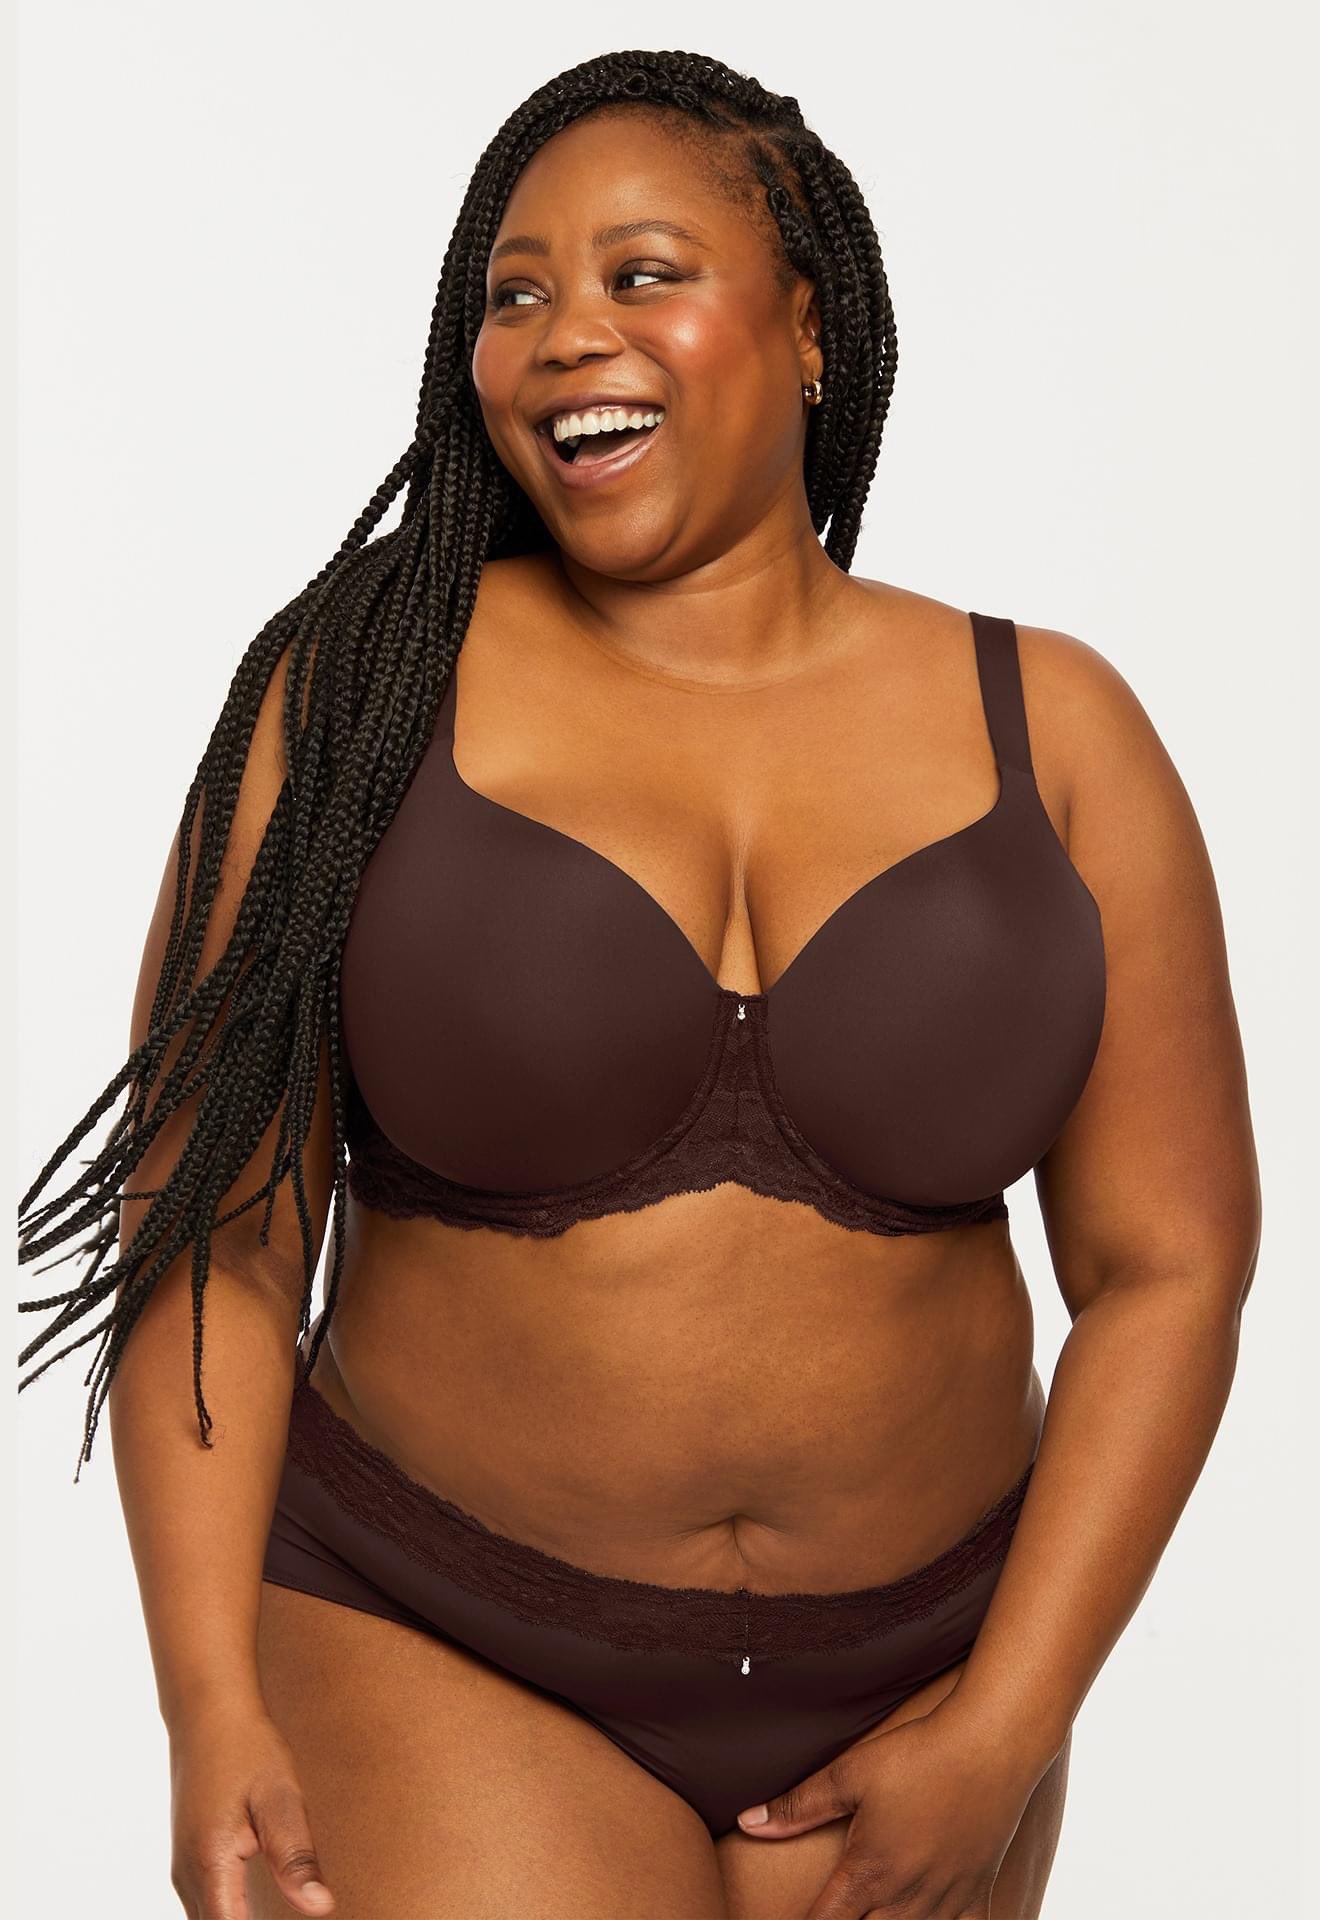 a la mode intimates on X: We offer body-positive styles & fit for